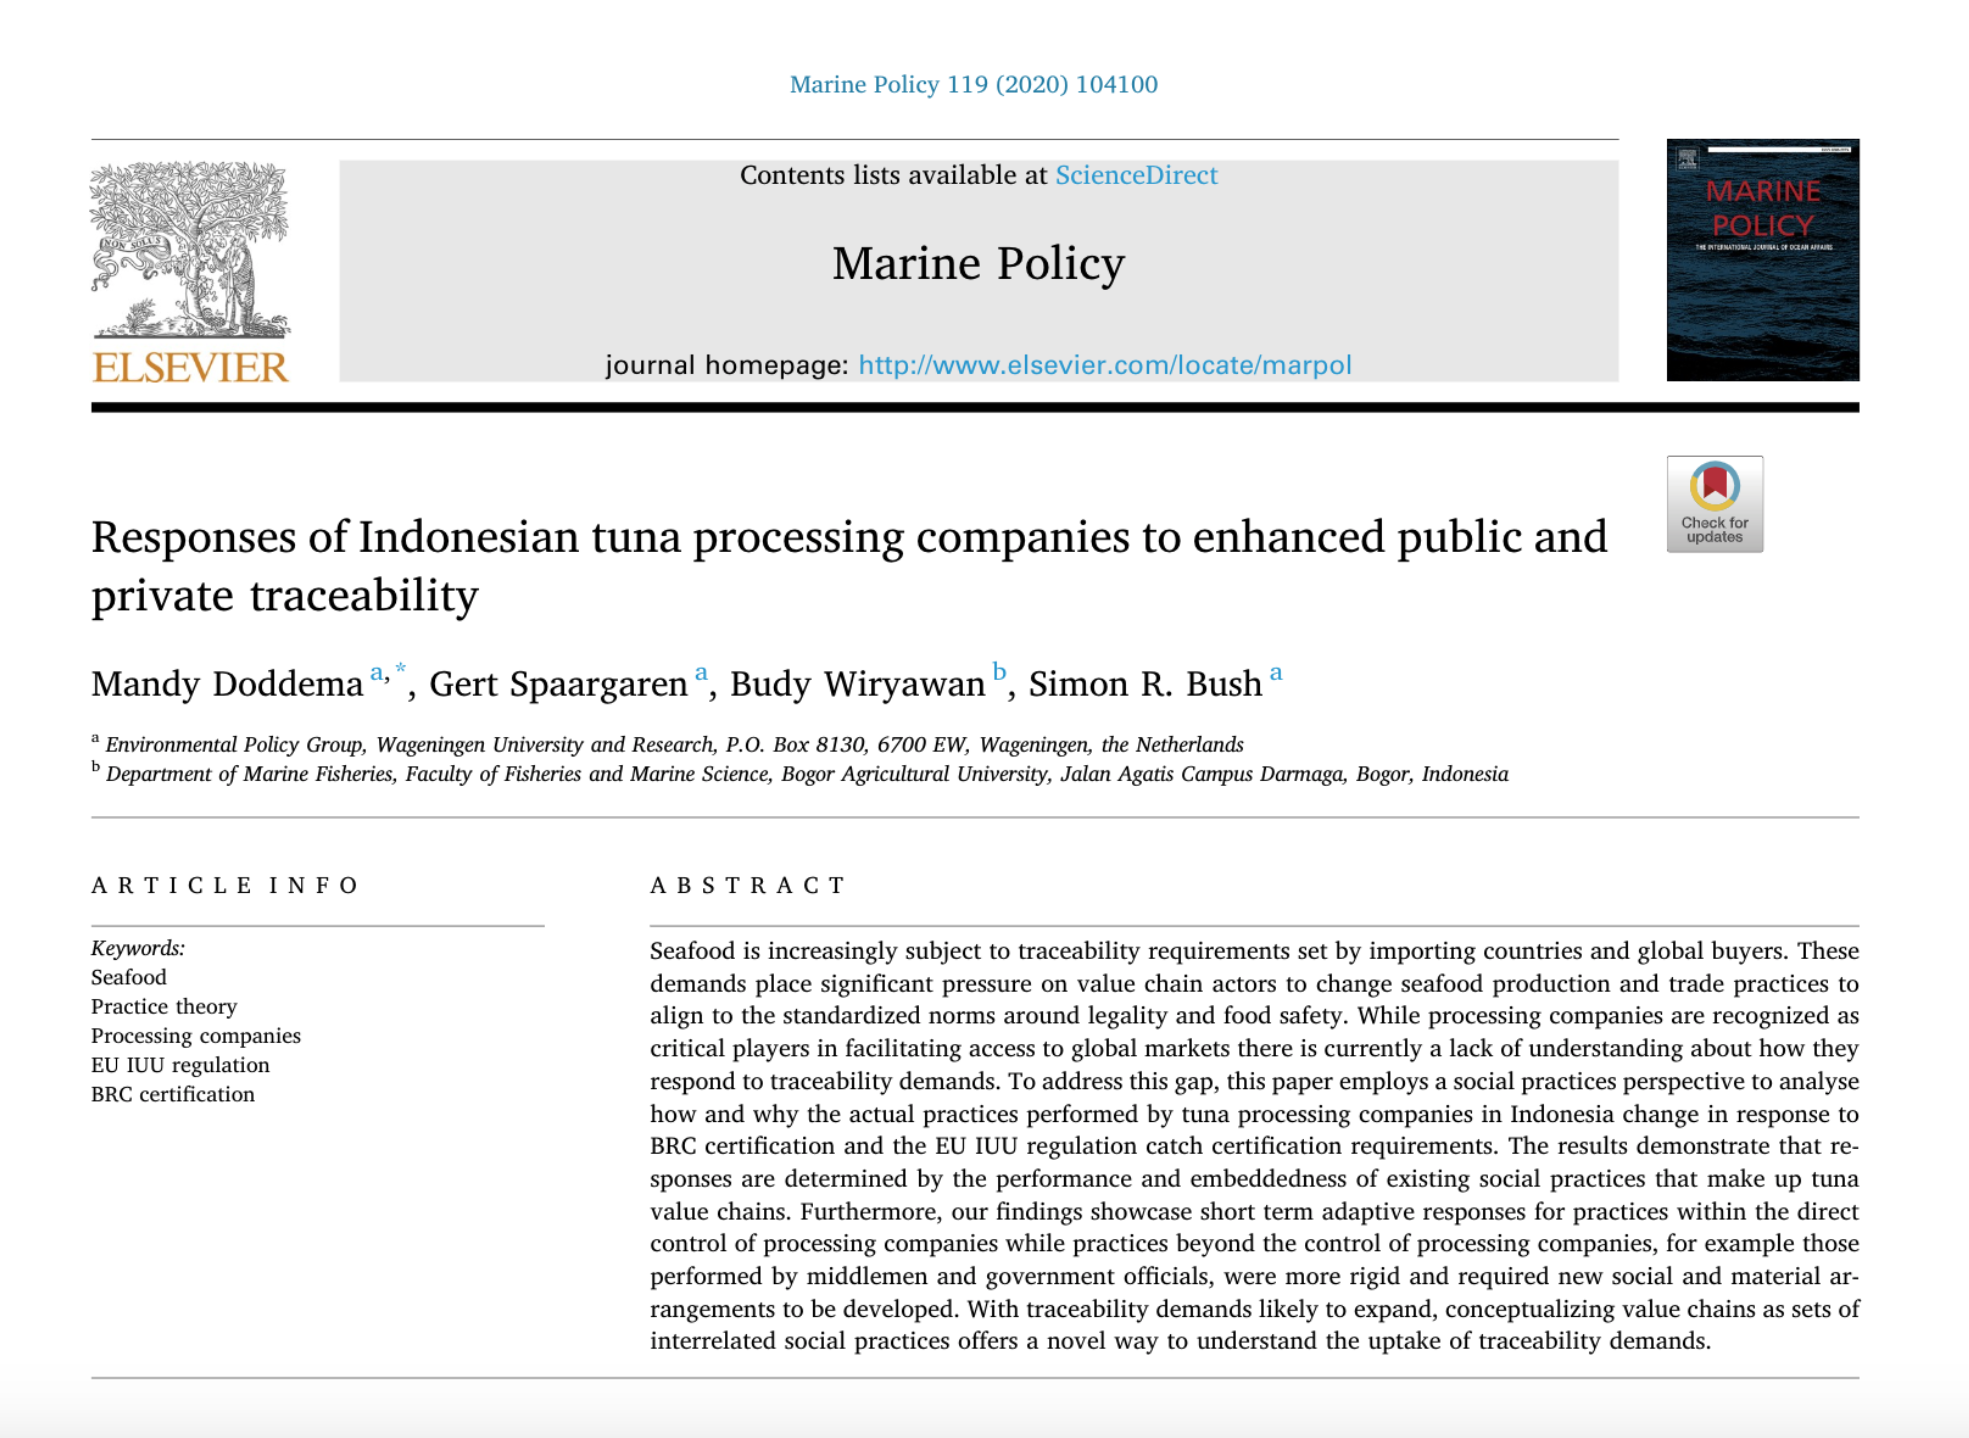 screenshot of title page from Marine Policy Journal includes paper title, authors, and abstract